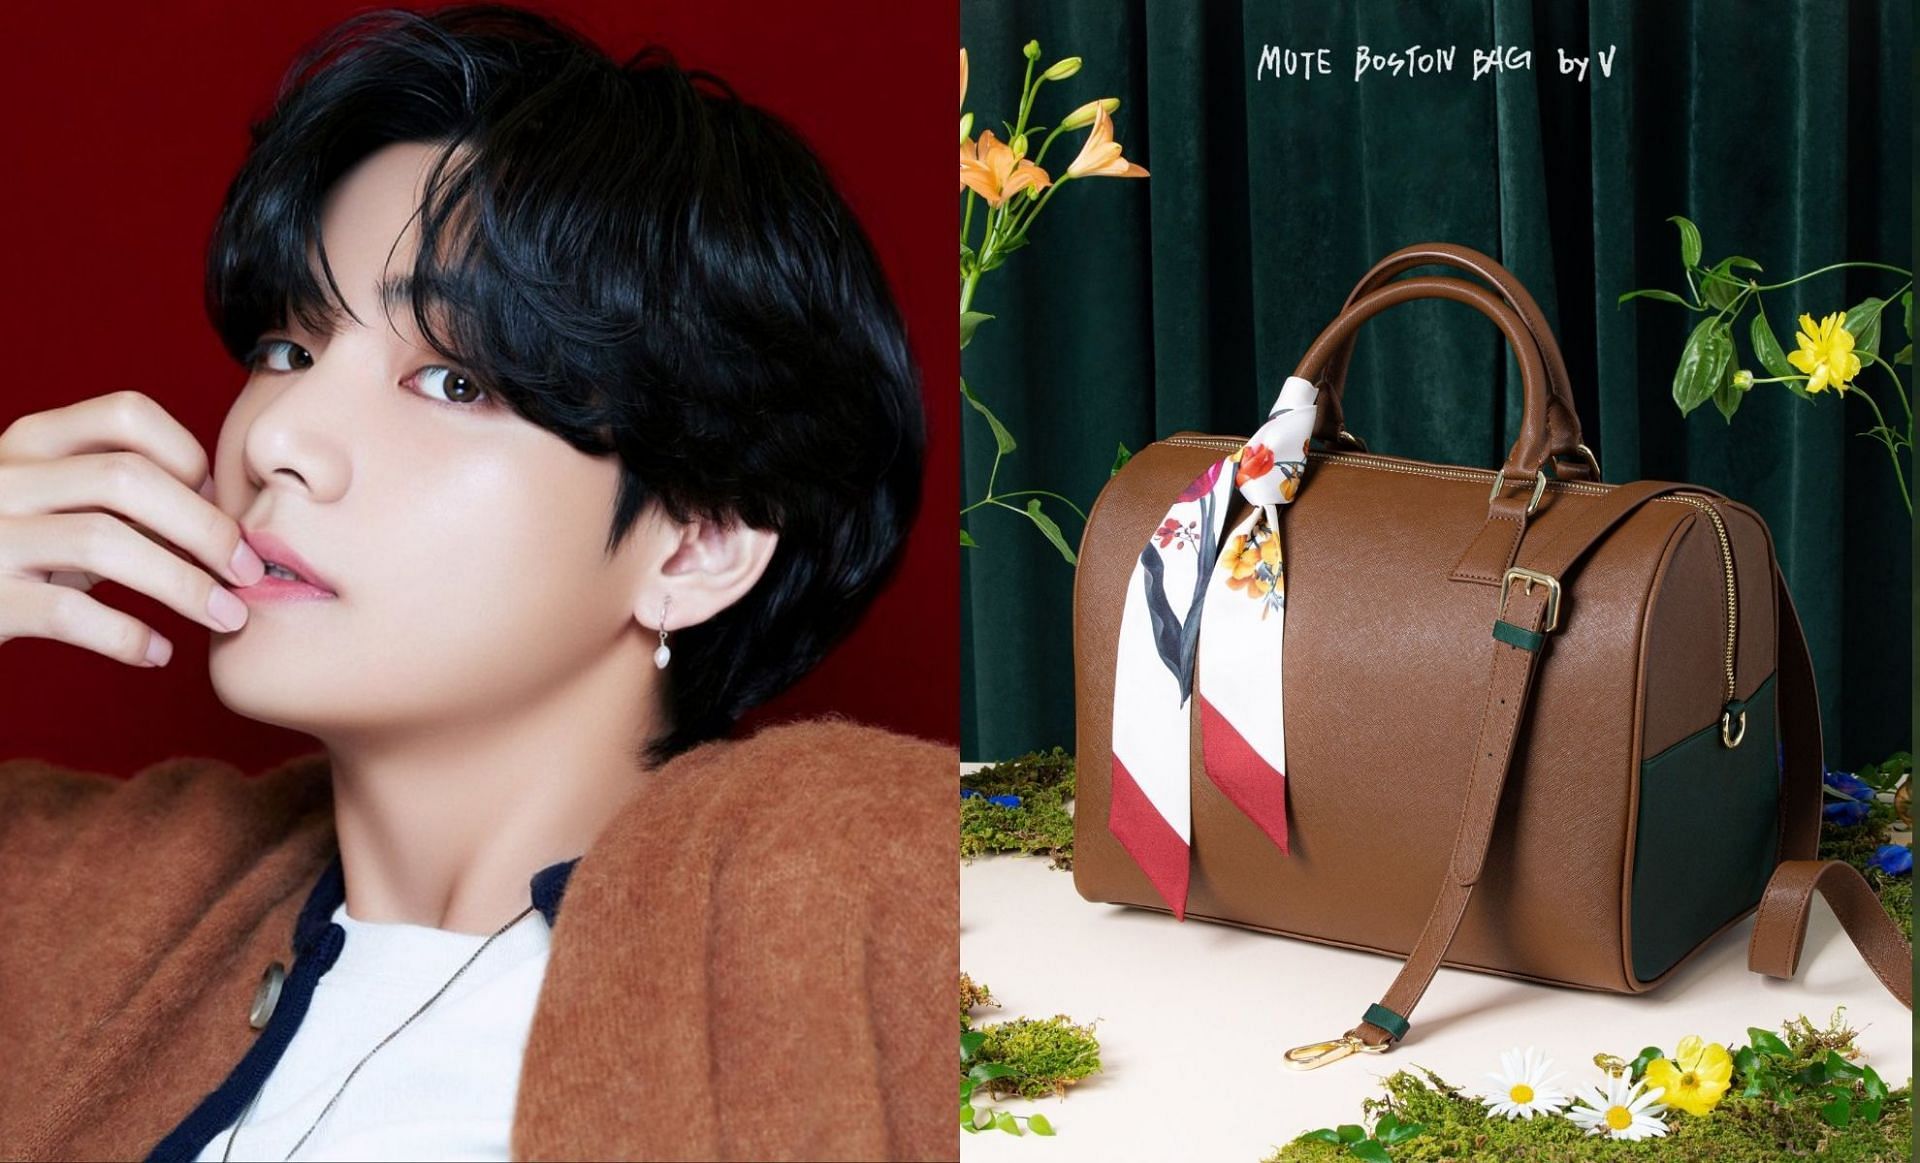 BTS V's explanation on how to use his artist-made Mute Boston Bag